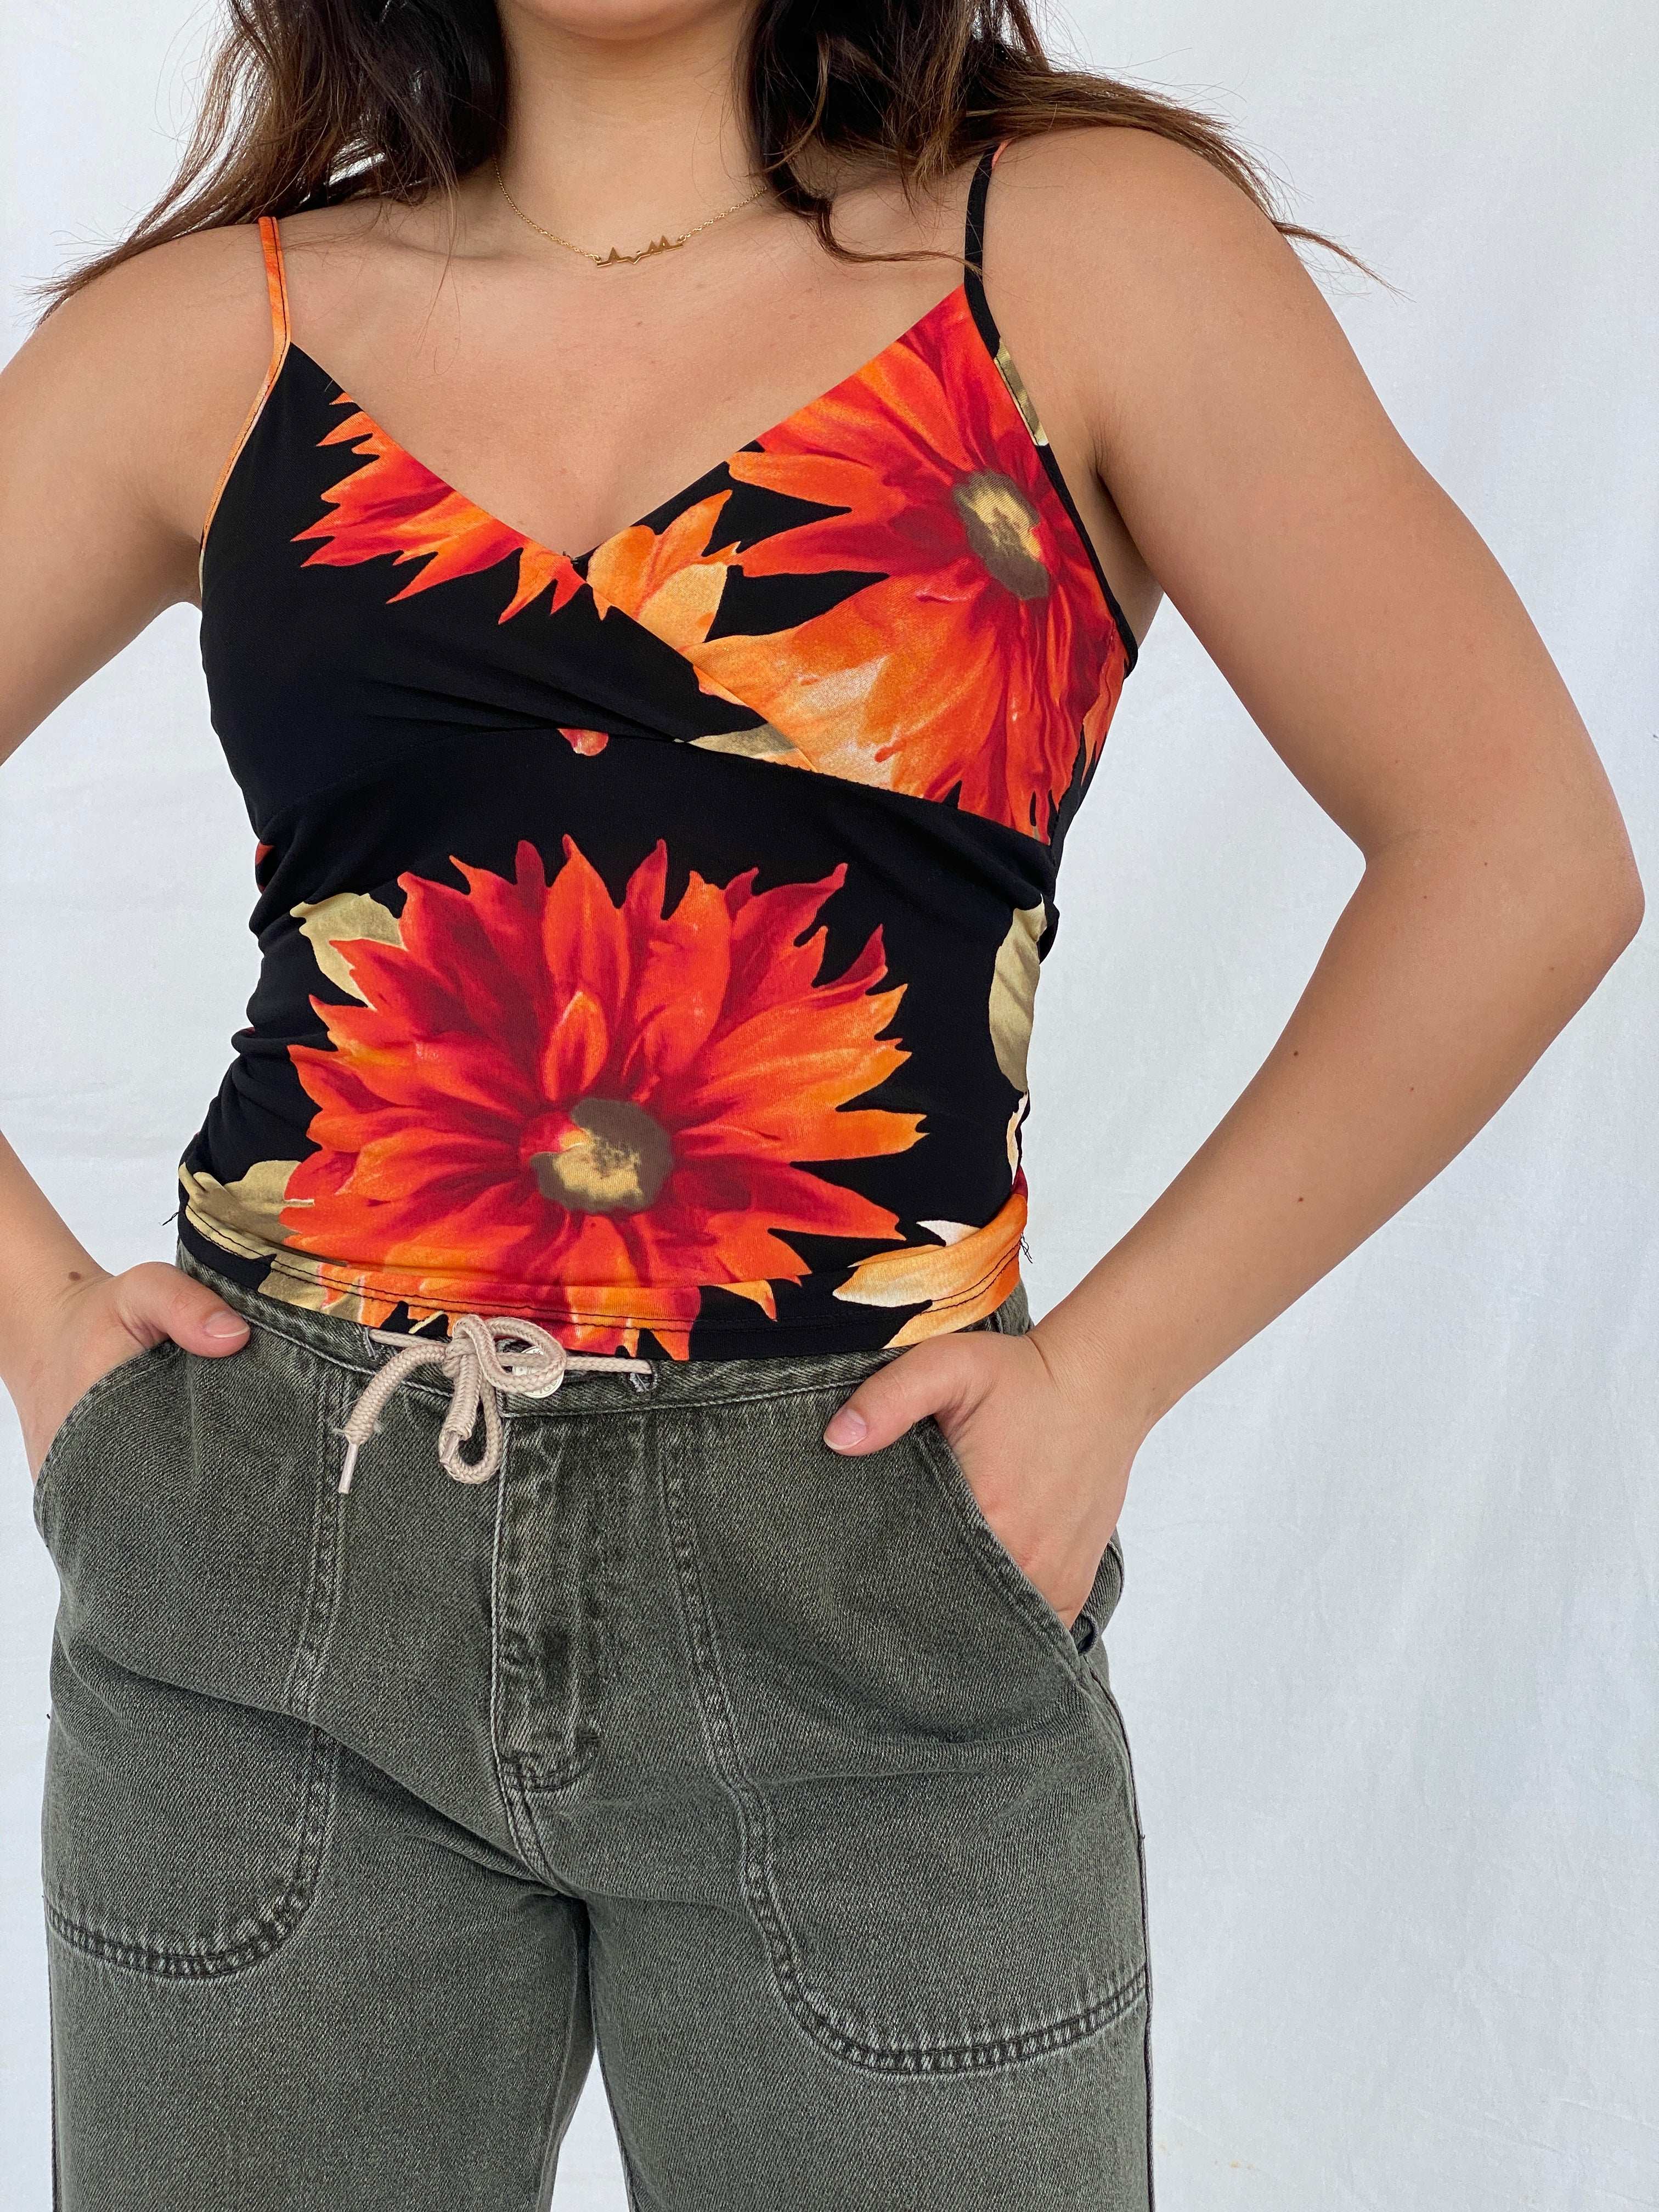 Vintage Floral Top - Size M - Balagan Vintage Sleeveless Top 00s, Lana, NEW IN, sleeveless top, summer